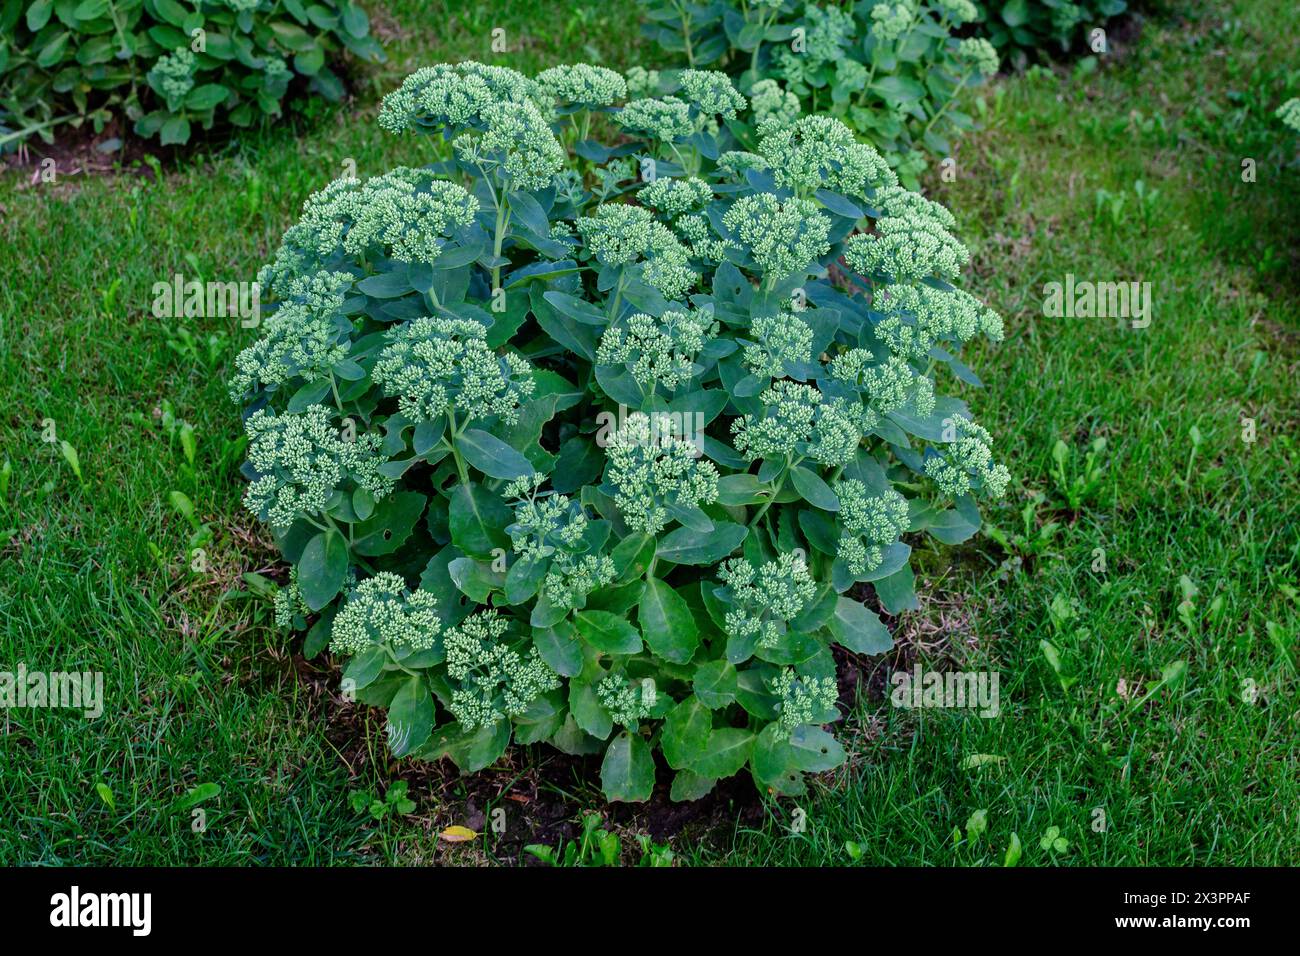 Many delicate green flower buds of Hylotelephium spectabile, known as Sedum, iceplant or showy or butterfly stonecrop flowes and green leaves in a a g Stock Photo